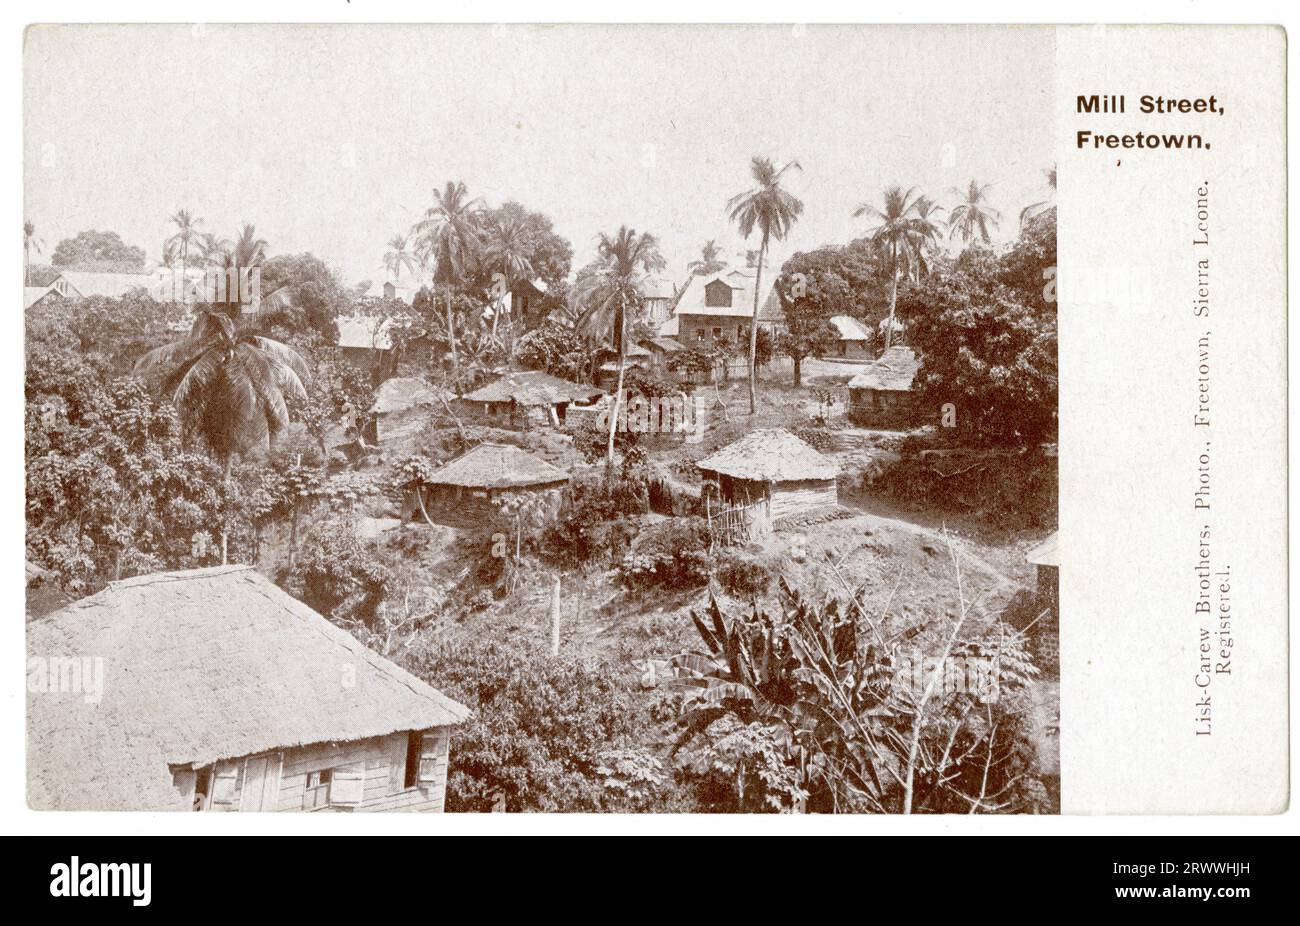 Postcard view of Mill Street in Freetown, showing small houses dotted amongst tall trees and larger colonial-style buildings in the background. Printed caption: Mill Street, Freetown. Stock Photo